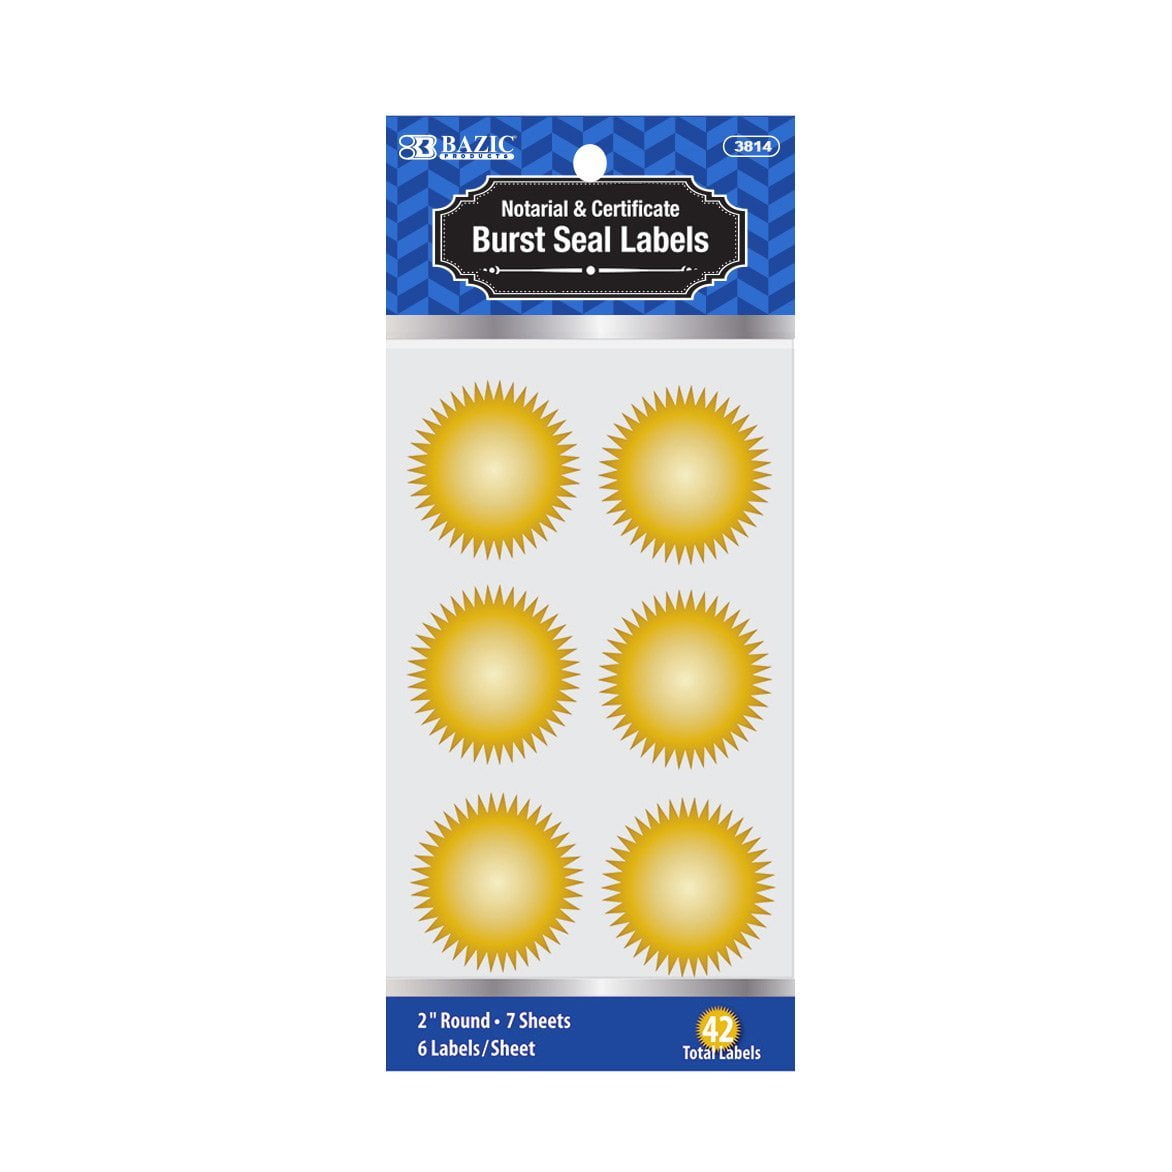 BAZIC 2 Gold Foil Notary and Certificate Burst Seal Labels 6 Sheets. 42 Labels